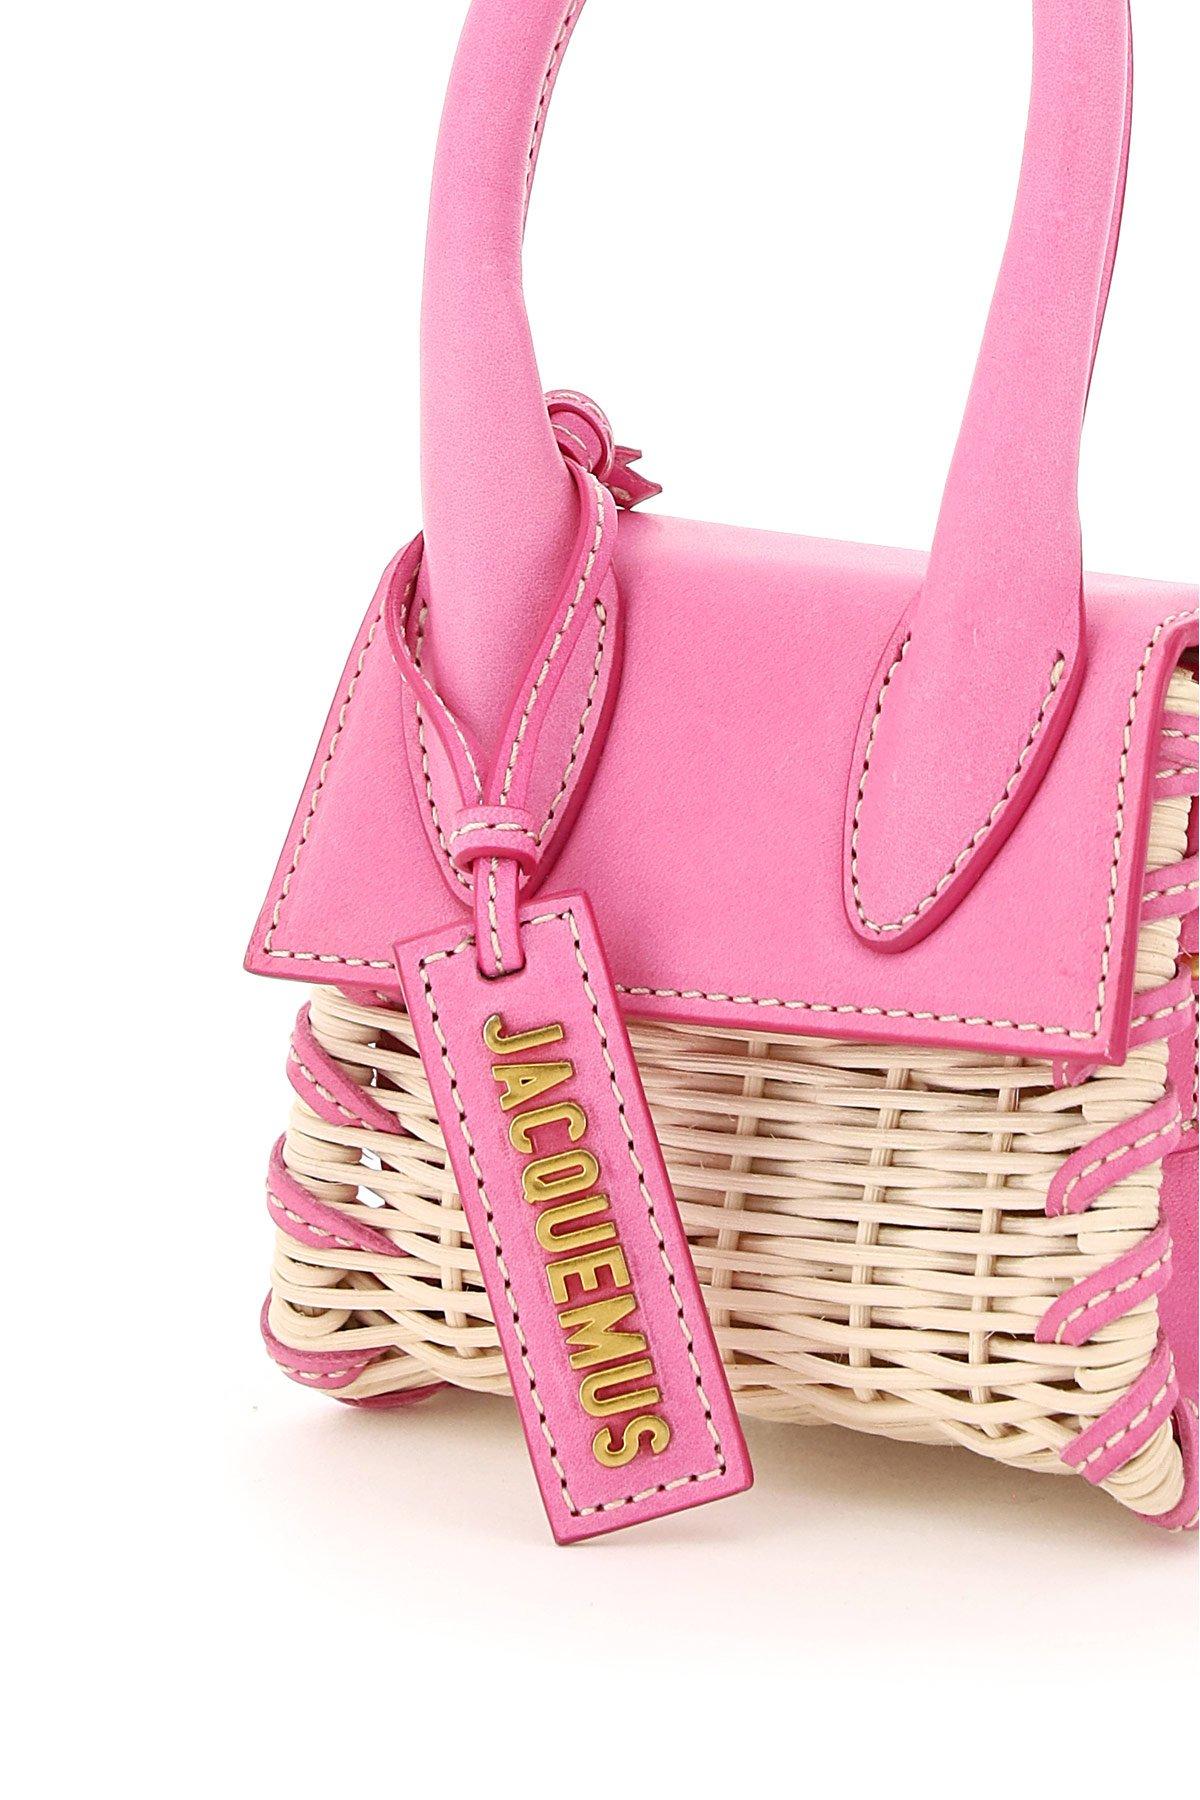 Jacquemus Le Chiquito Leather-trimmed Wicker Tote in Pink